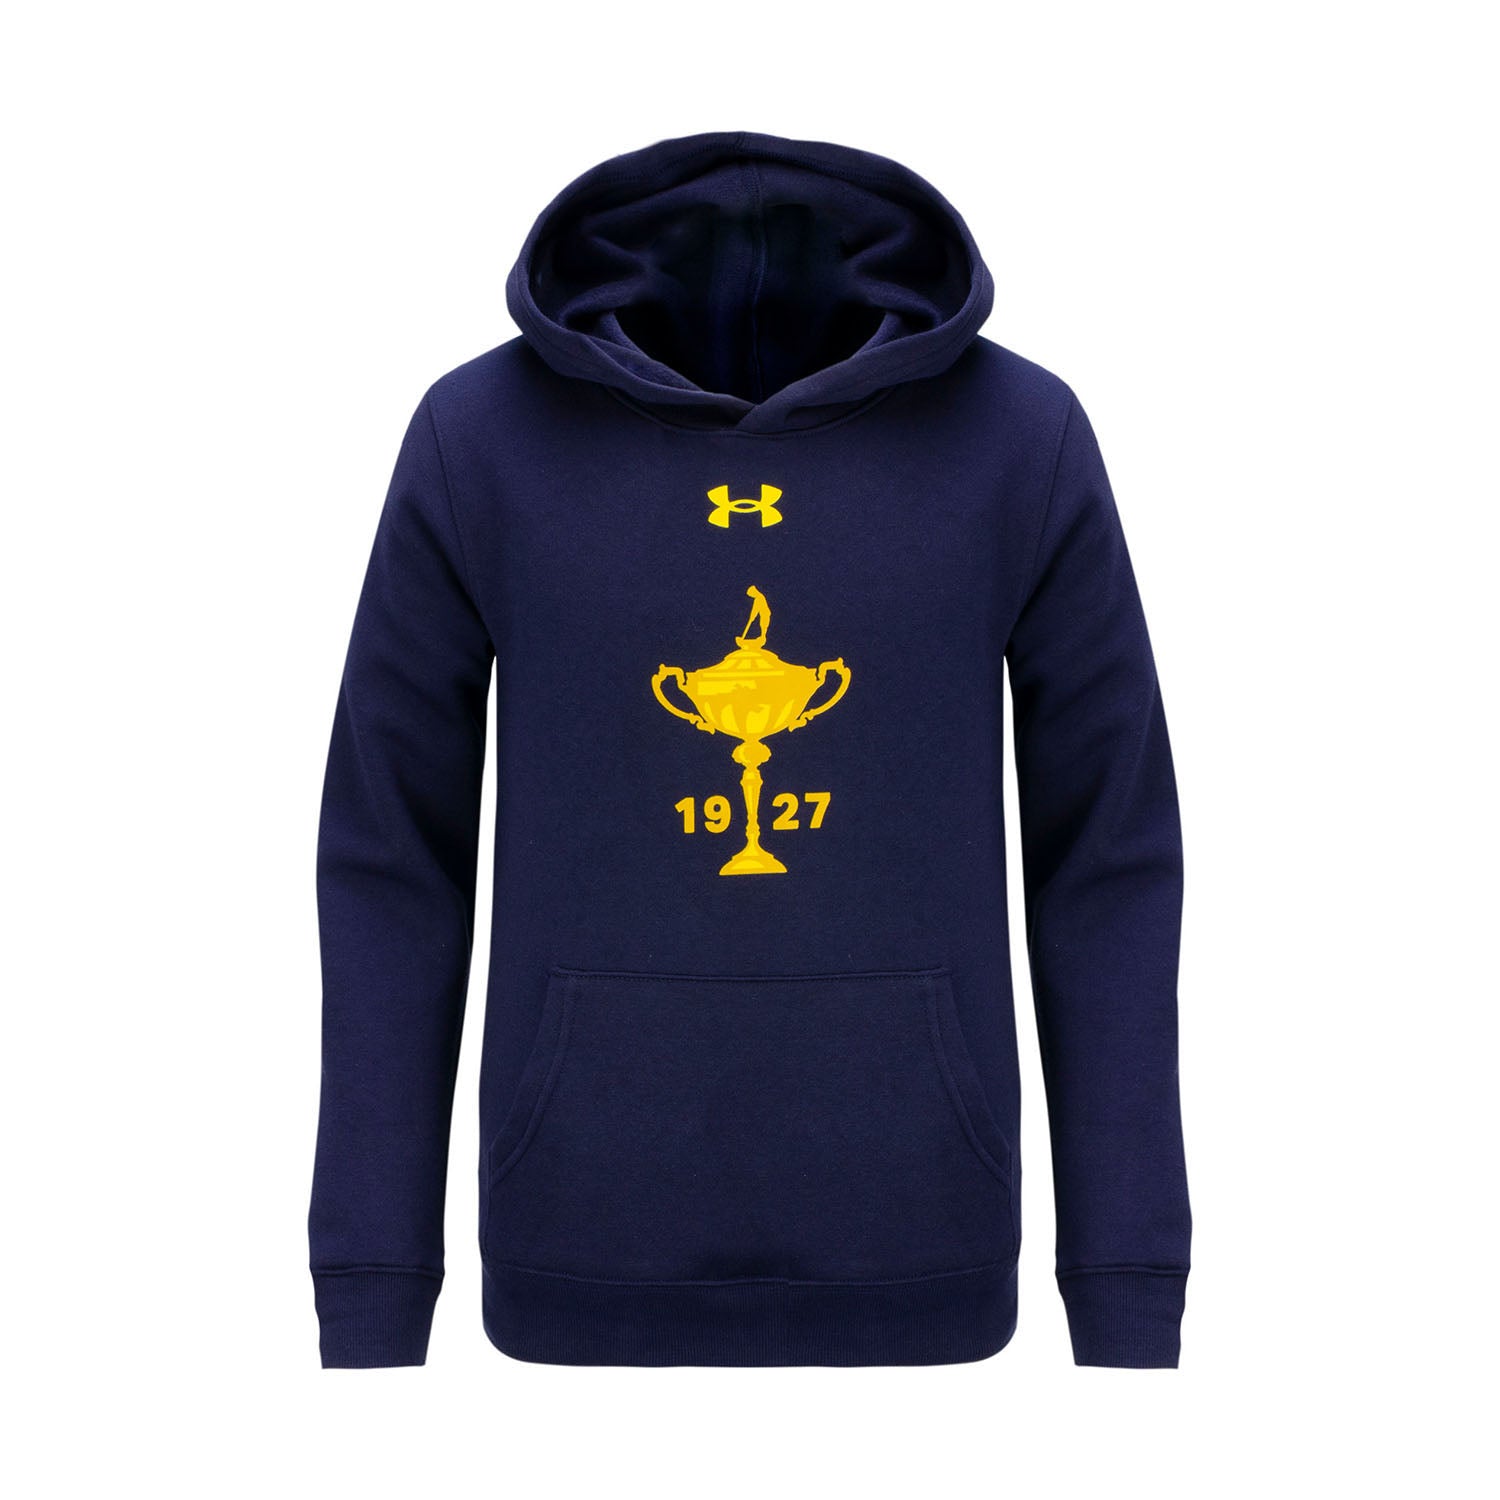 Boys Youth All Day Fleece Hoodie - Navy- Front View